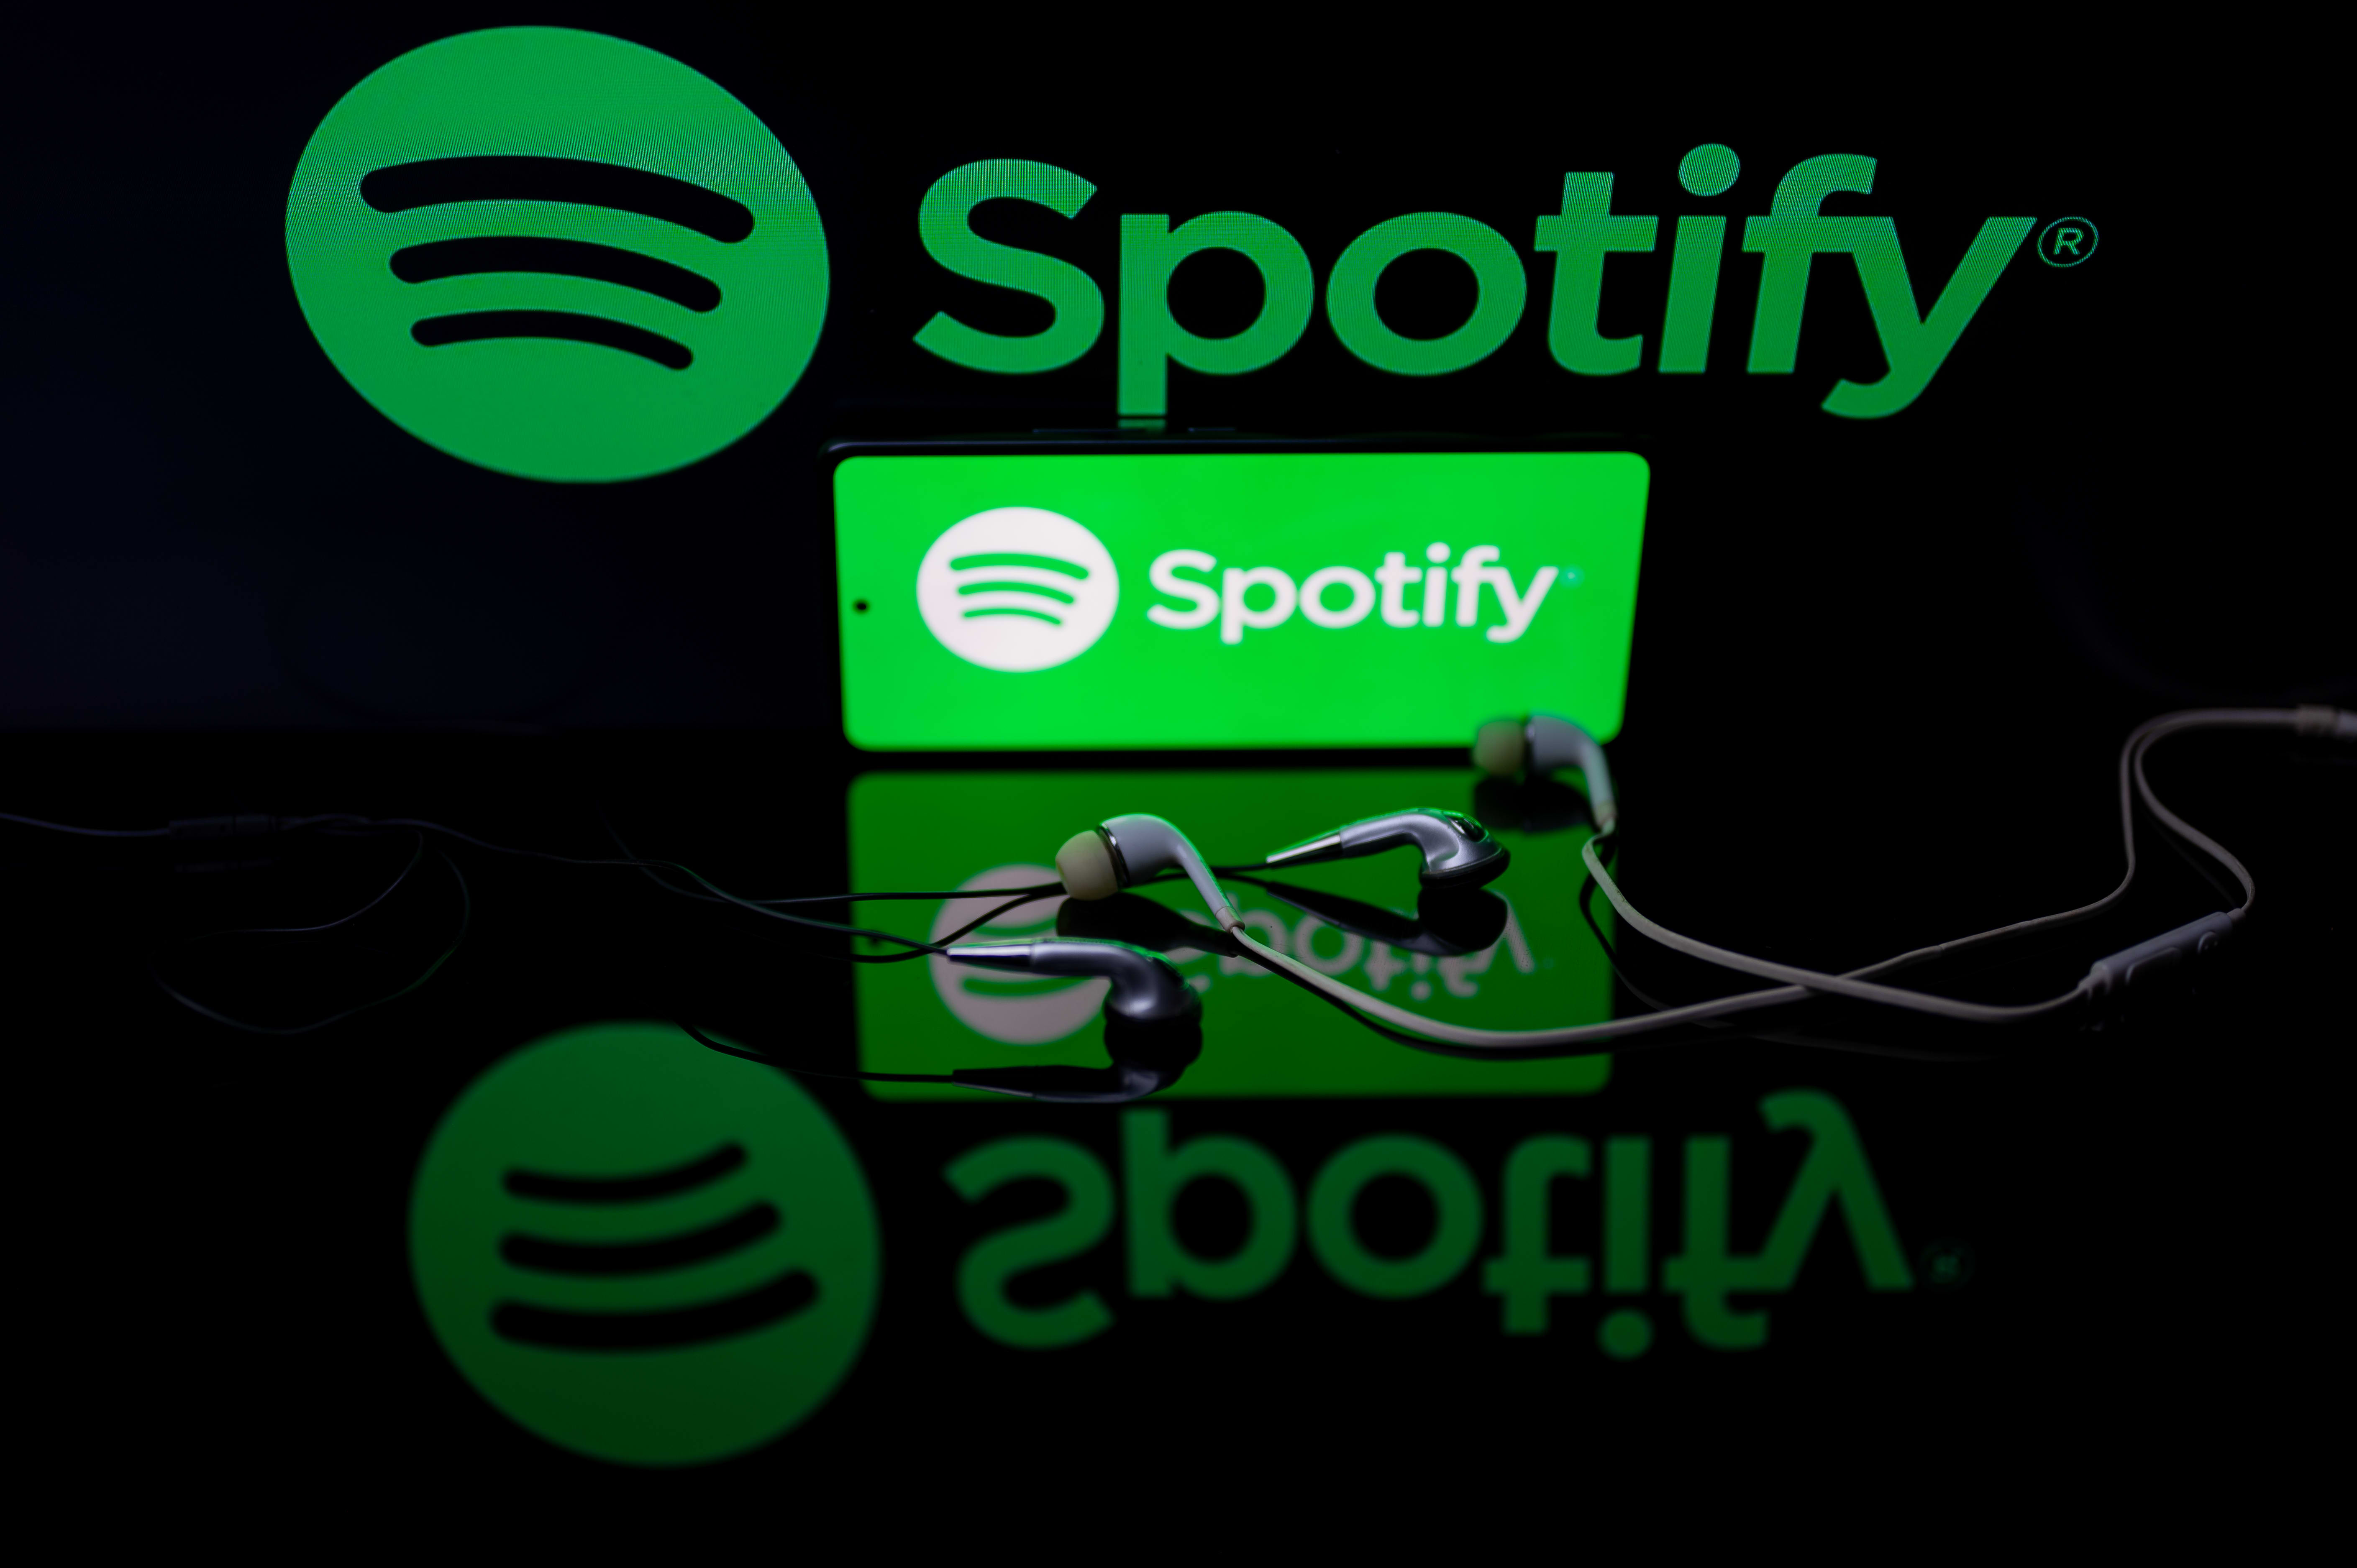 Wells Fargo downgrades Spotify, says stock could rally nearly 50% as margin expands